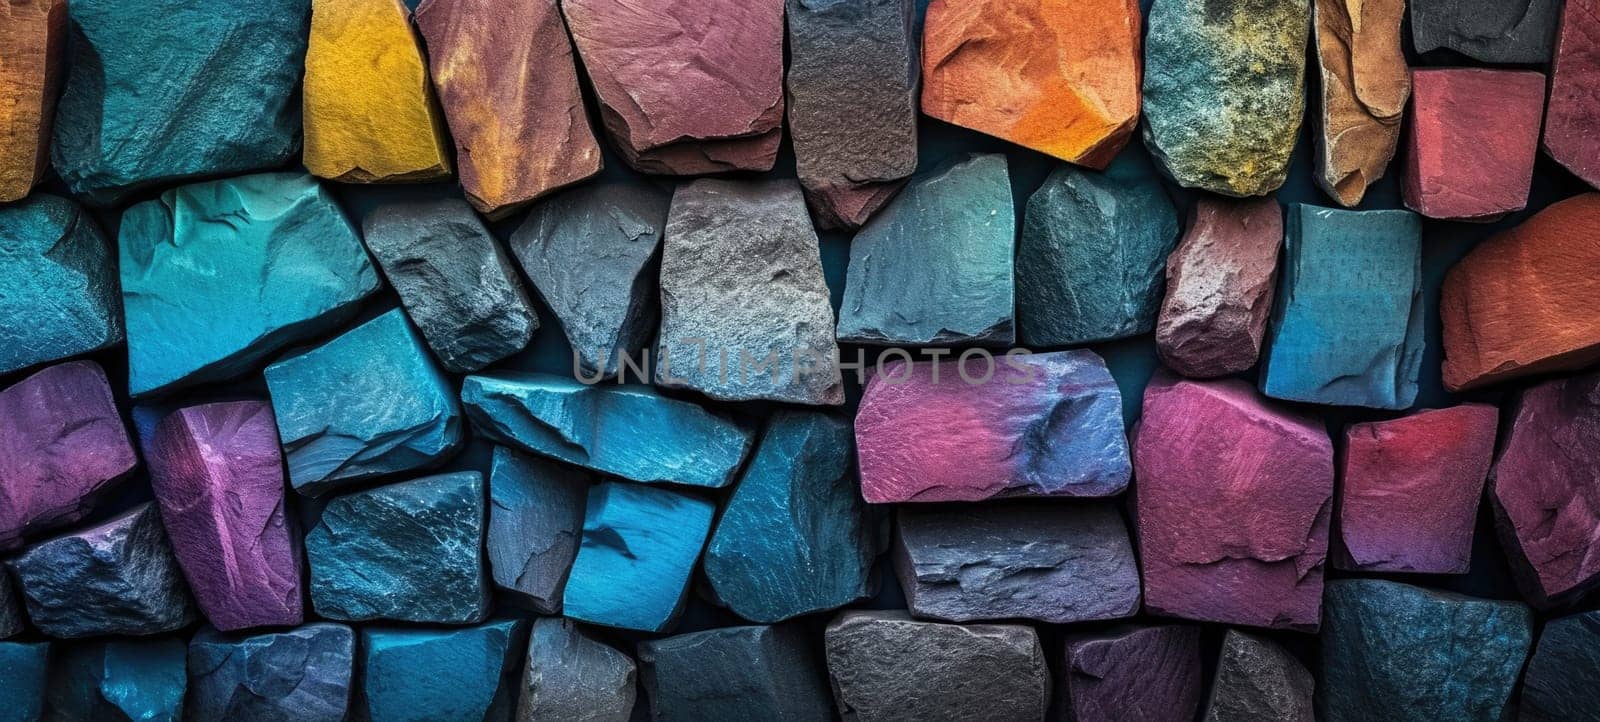 The pile of the multicolor of the marble and pebbles that can be used for decoration with many things like wall or floor and can be found anywhere that has used old fashioned decoration style. AIGX01.